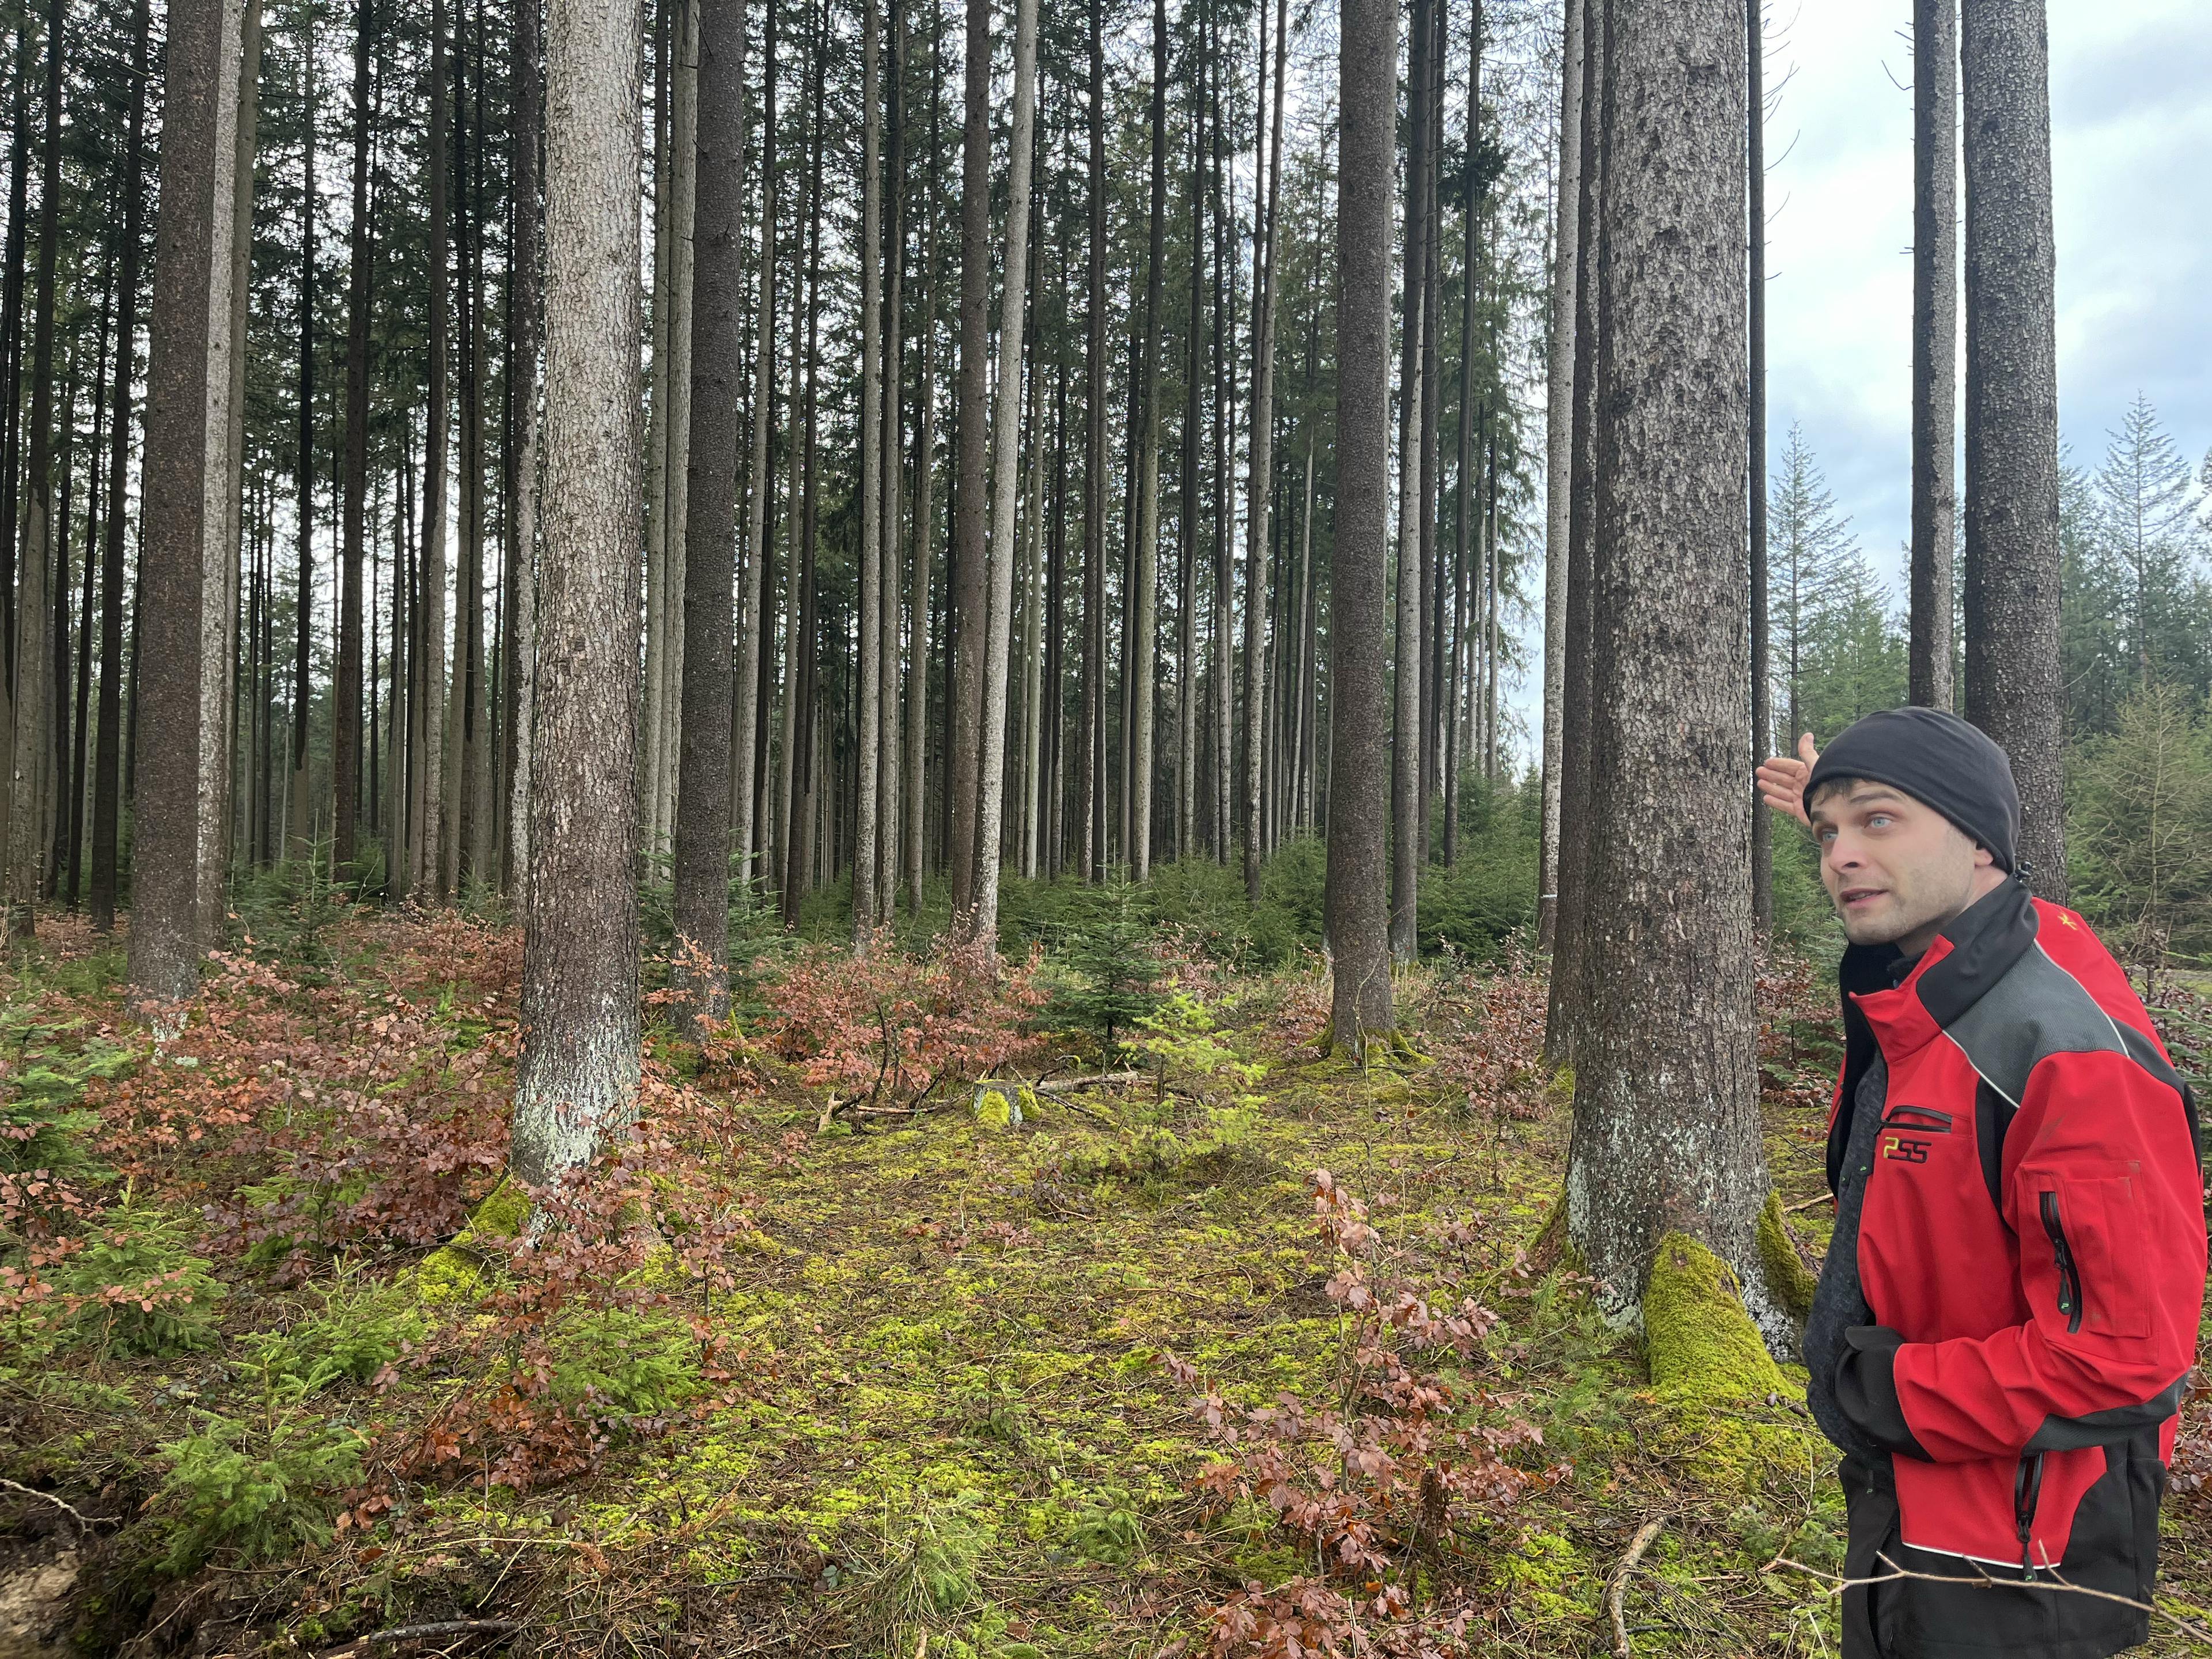 Forester Dubetz in his forest